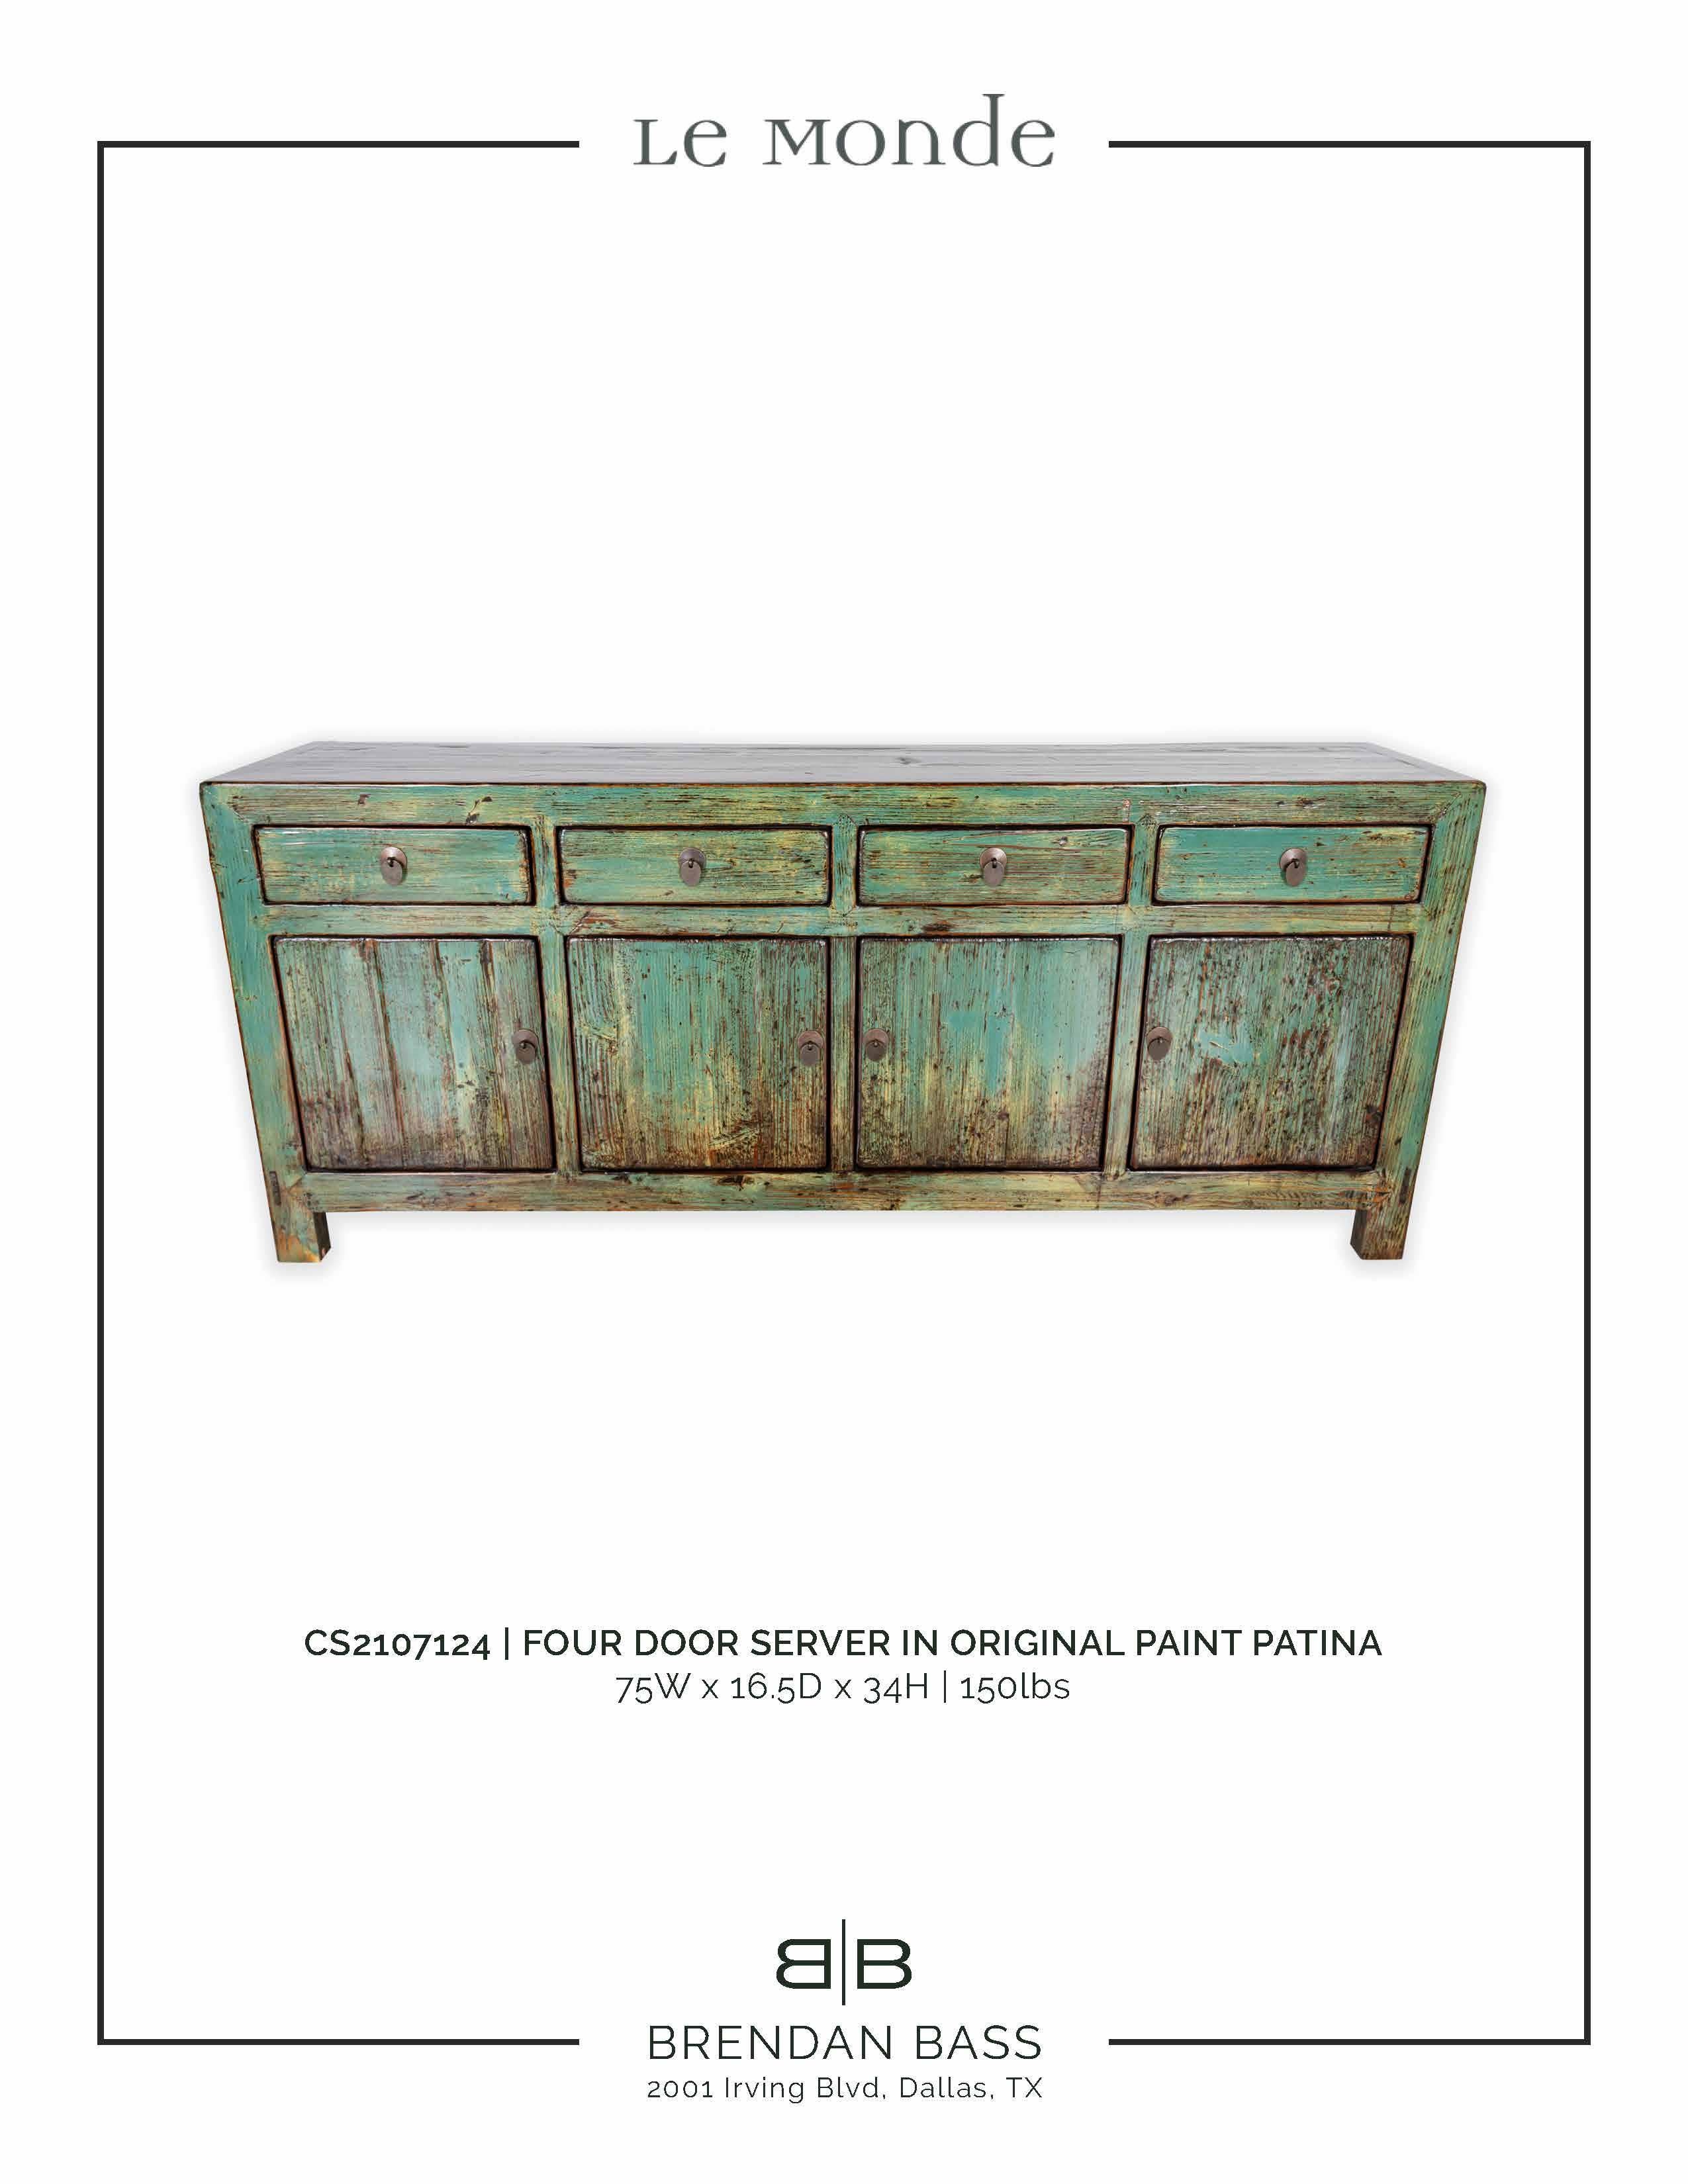 Contemporary Four Door Server in Original Paint Patina with Lacquer Overglaze